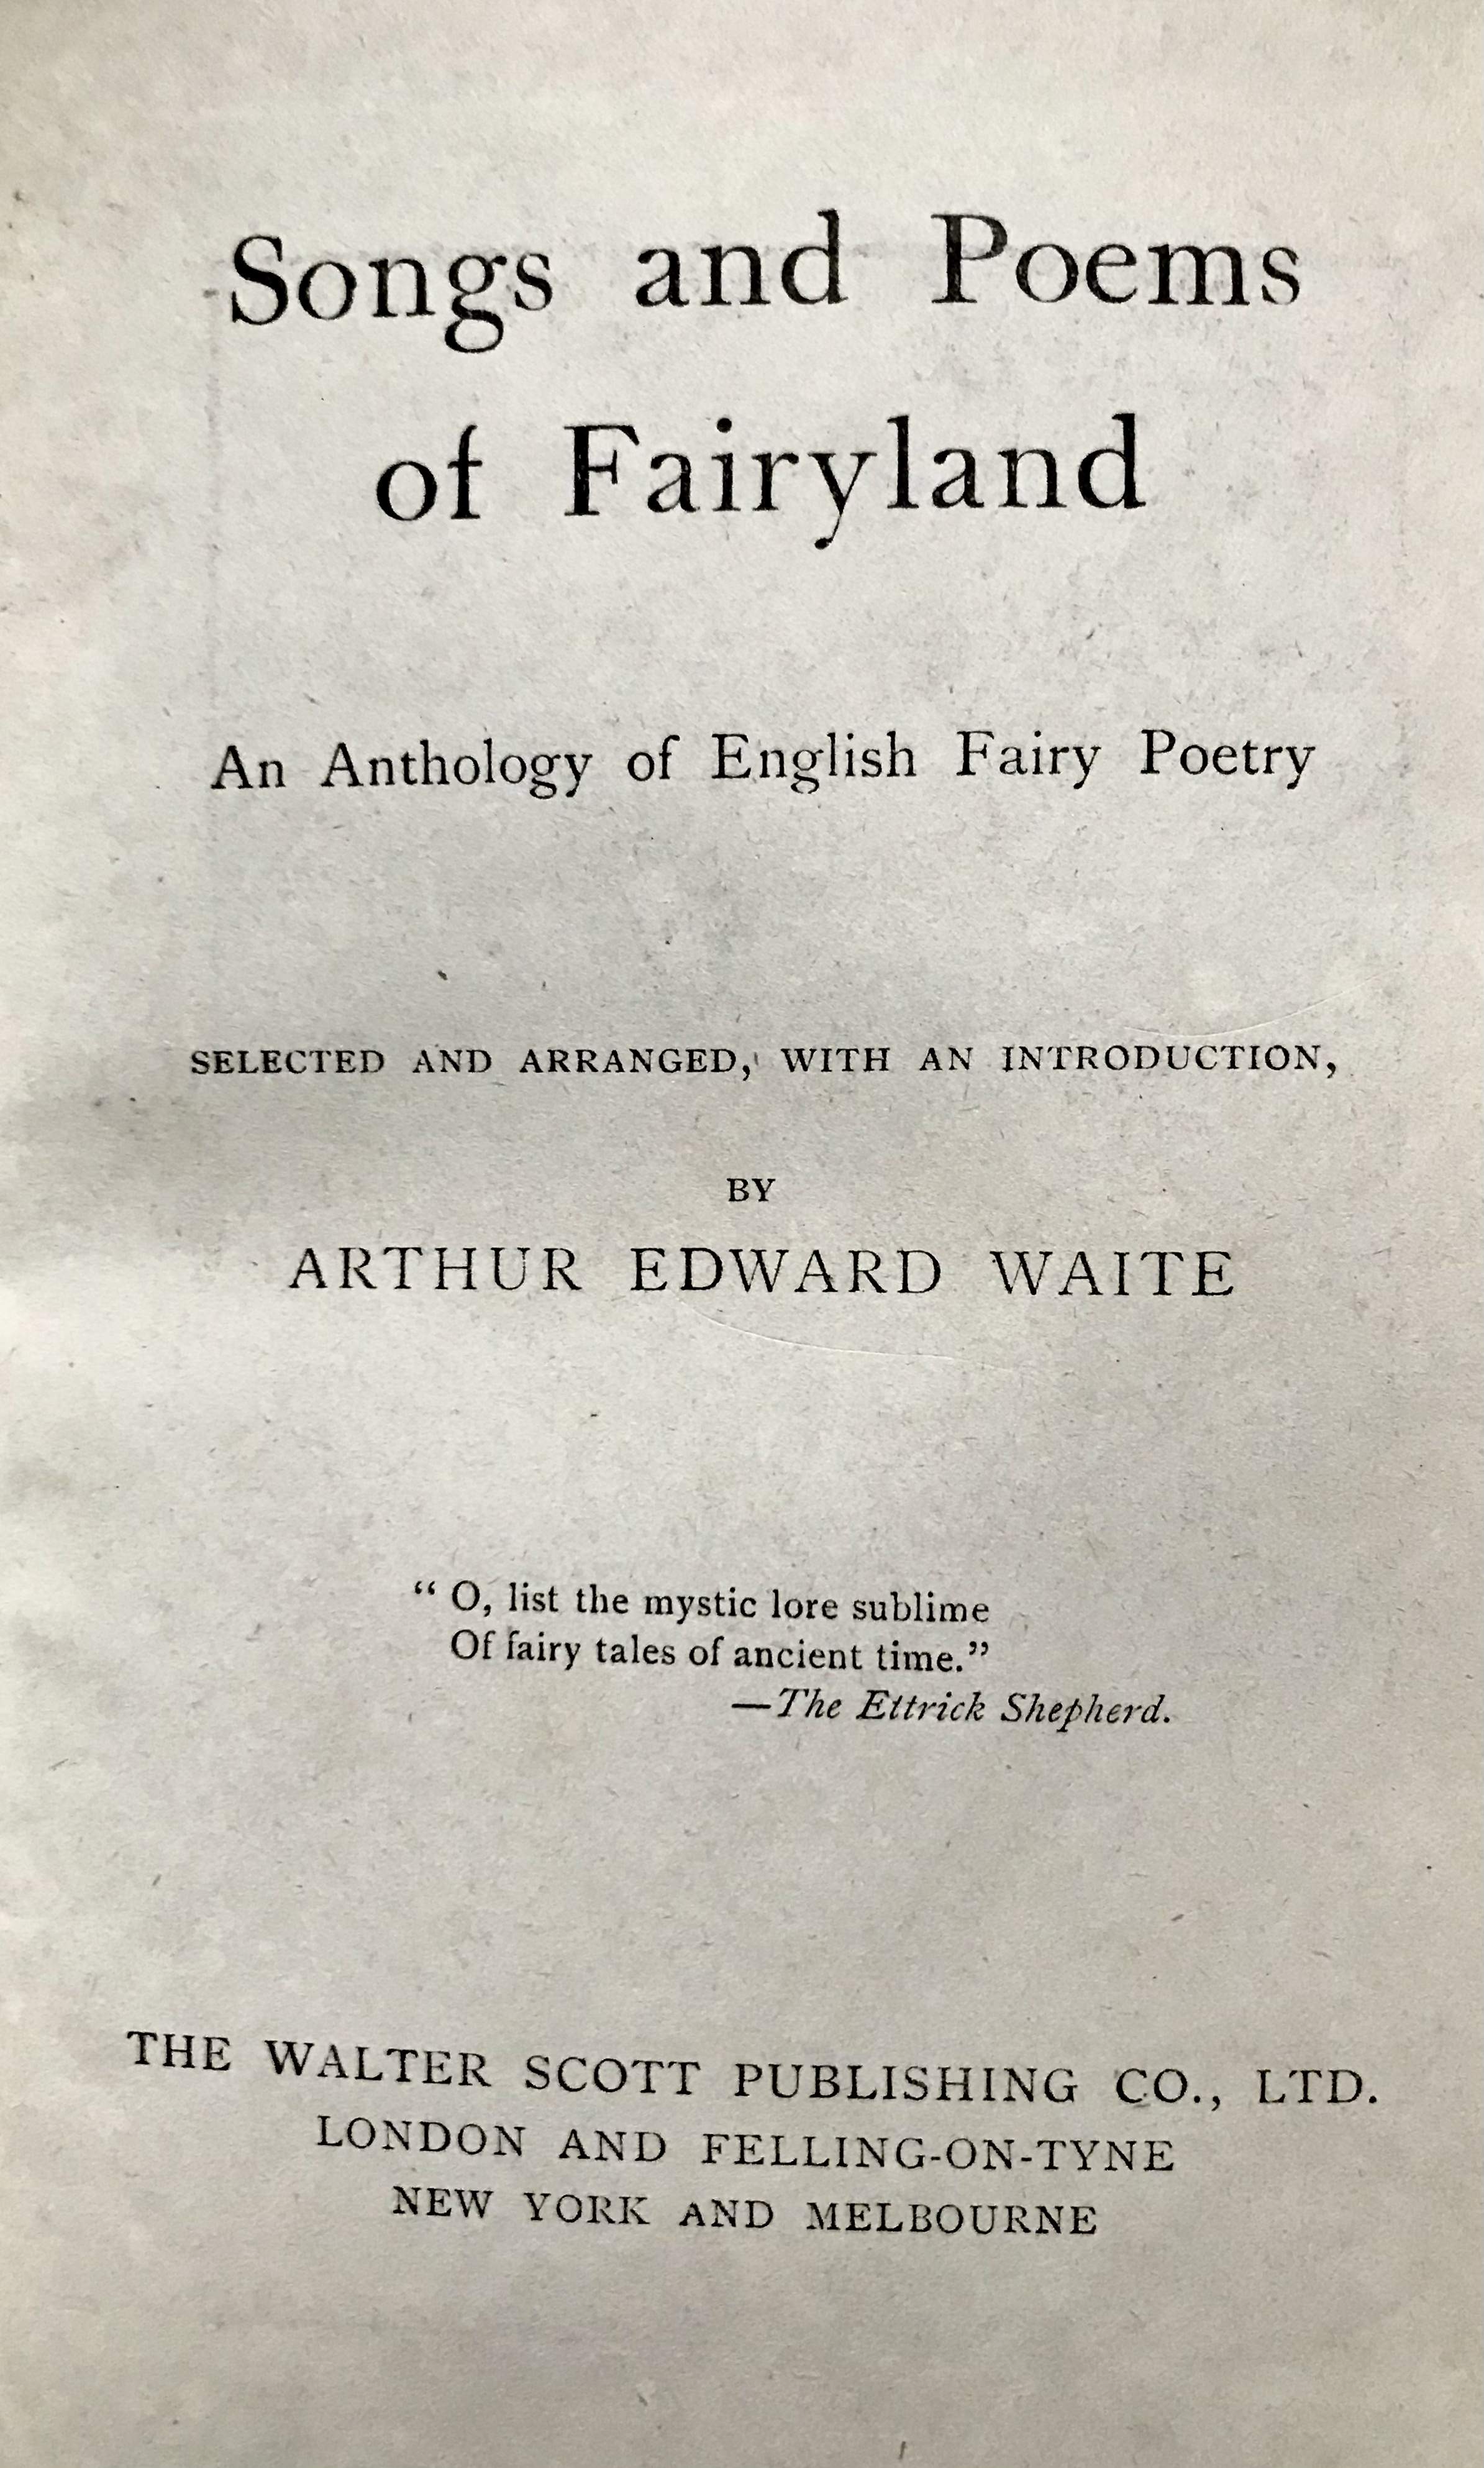 Songs And Poems of Fairyland: An Anthology of English Fairy Poetry by Arthur E. Waite